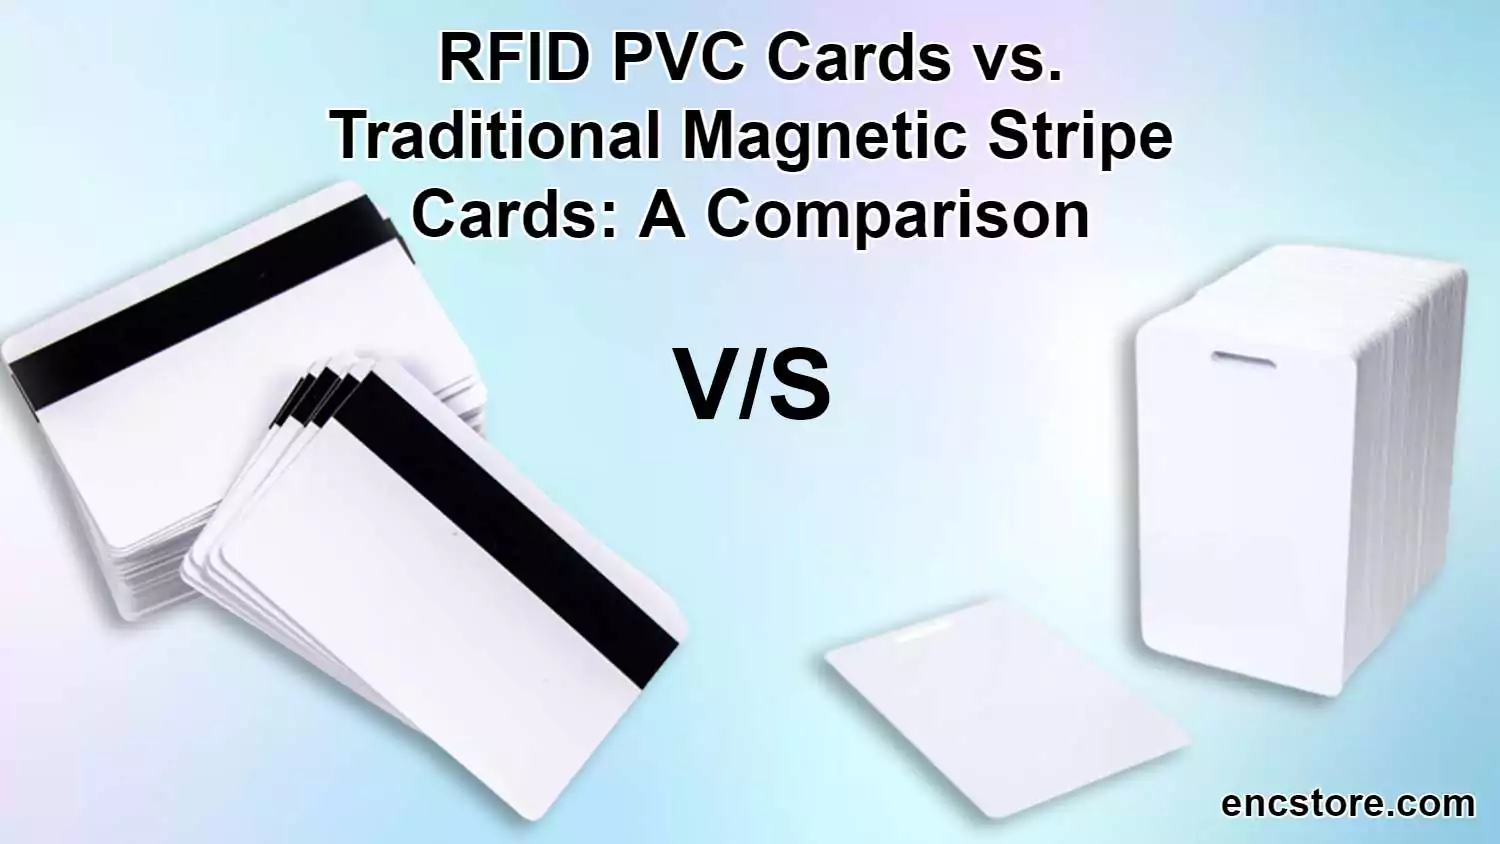 RFID PCV Cards vs Traditional Magnetic Stripe Cards